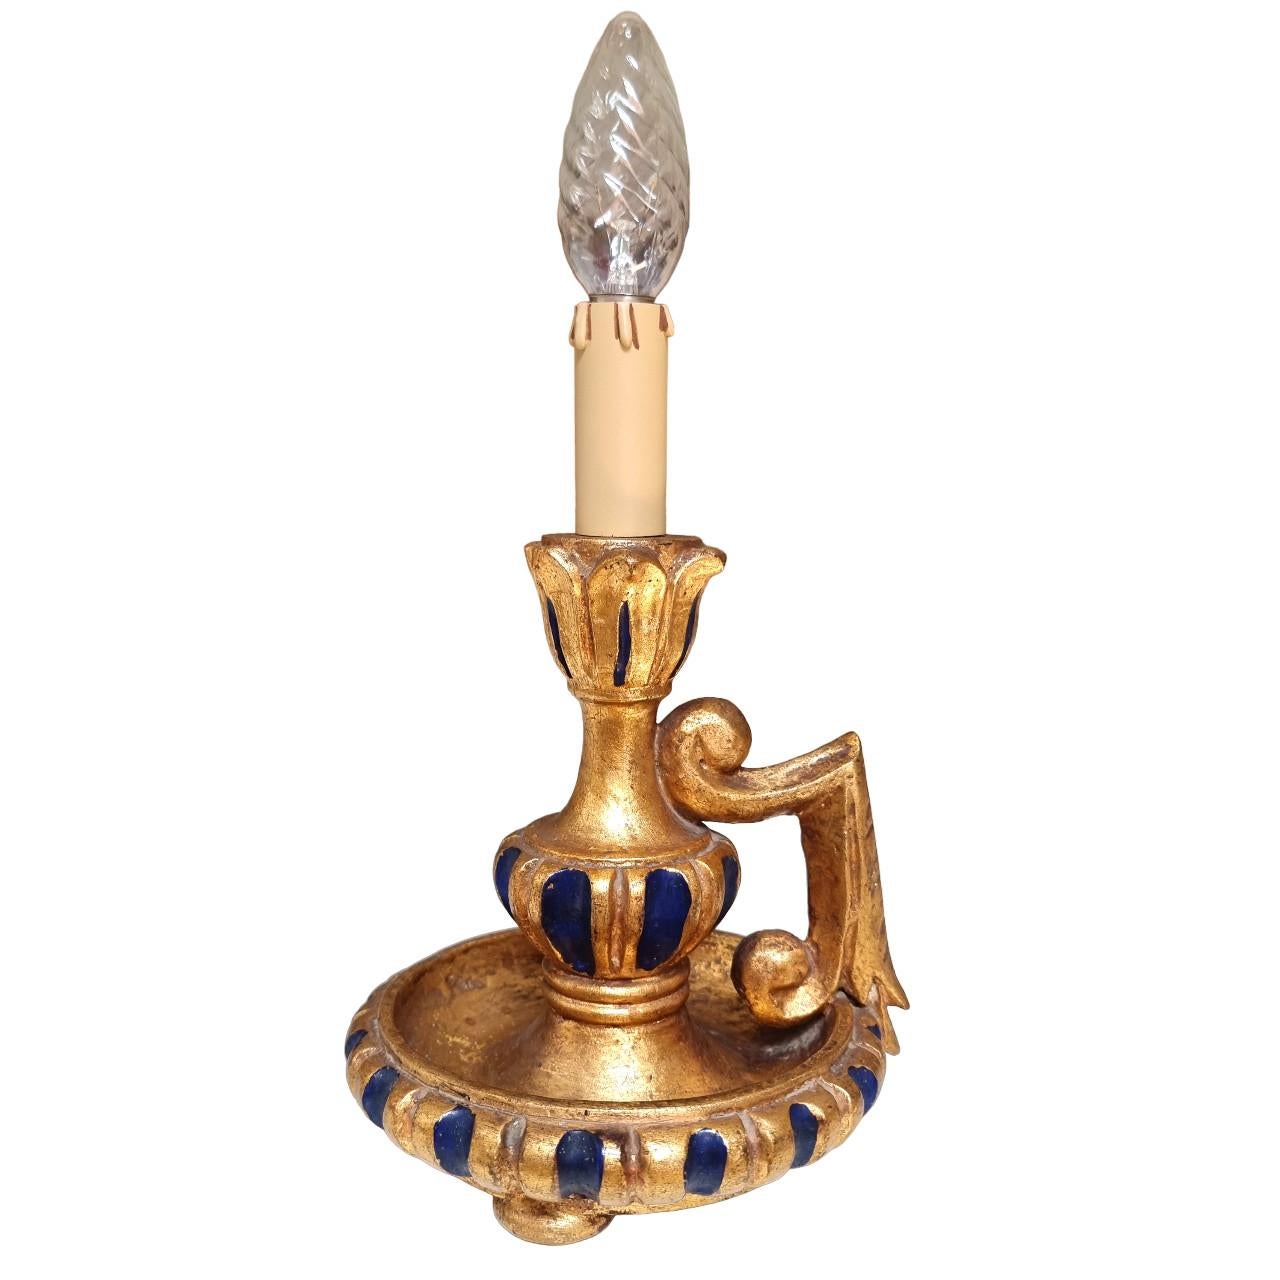 Italian Mid-20th Century Gilt Carved Wood Candlestick Table Lamp with Fortuny Lampshade